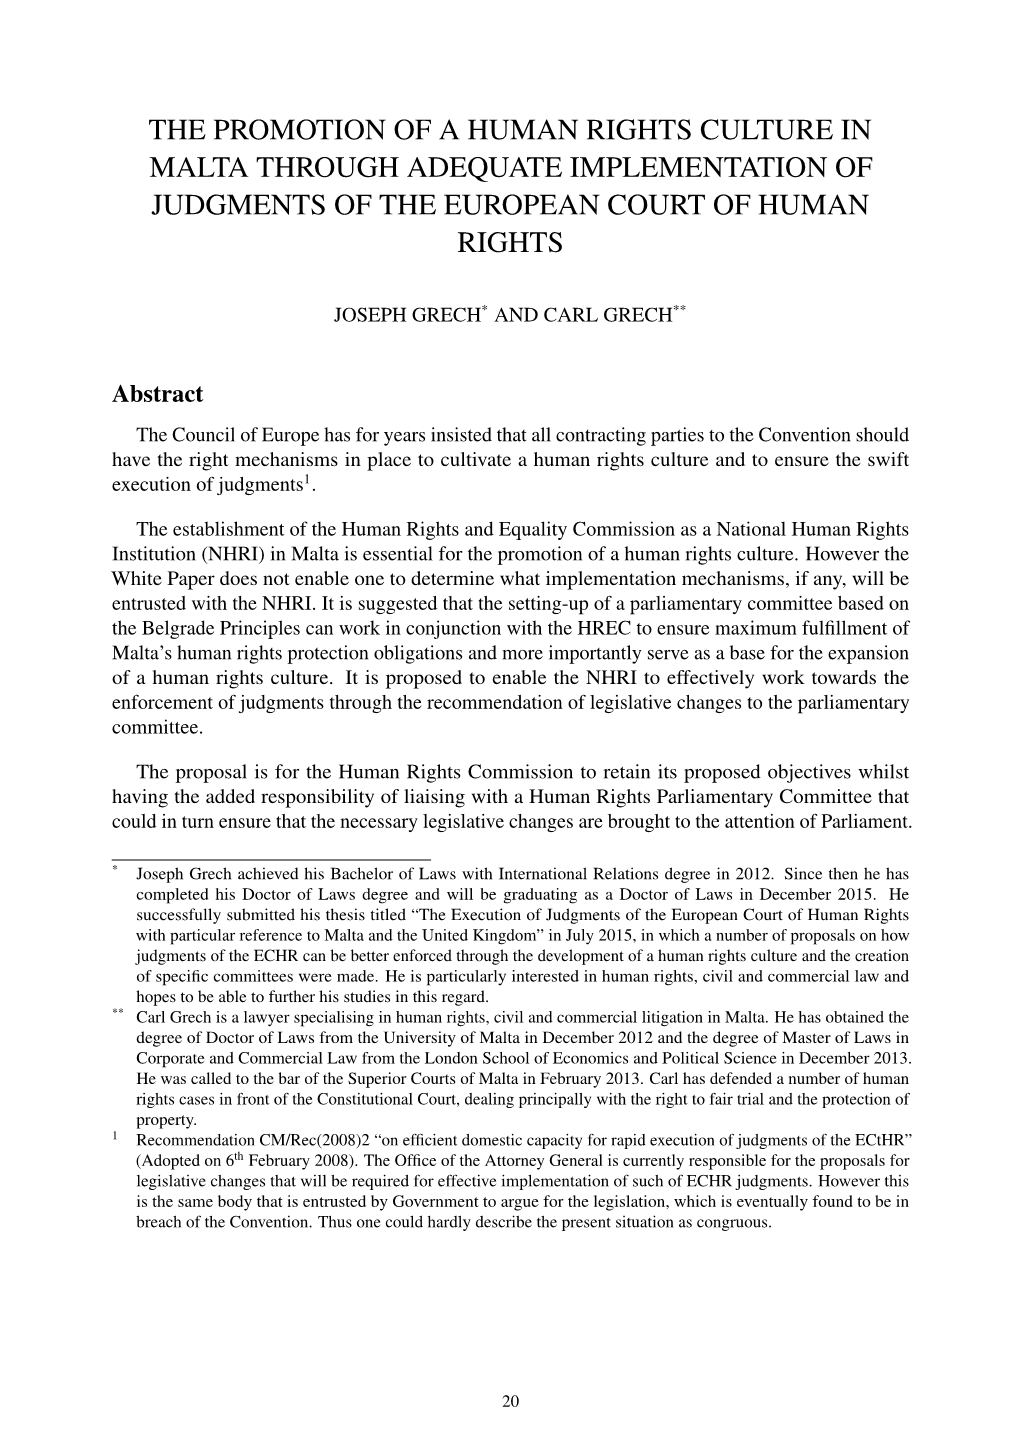 The Promotion of a Human Rights Culture in Malta Through Adequate Implementation of Judgments of the European Court of Human Rights